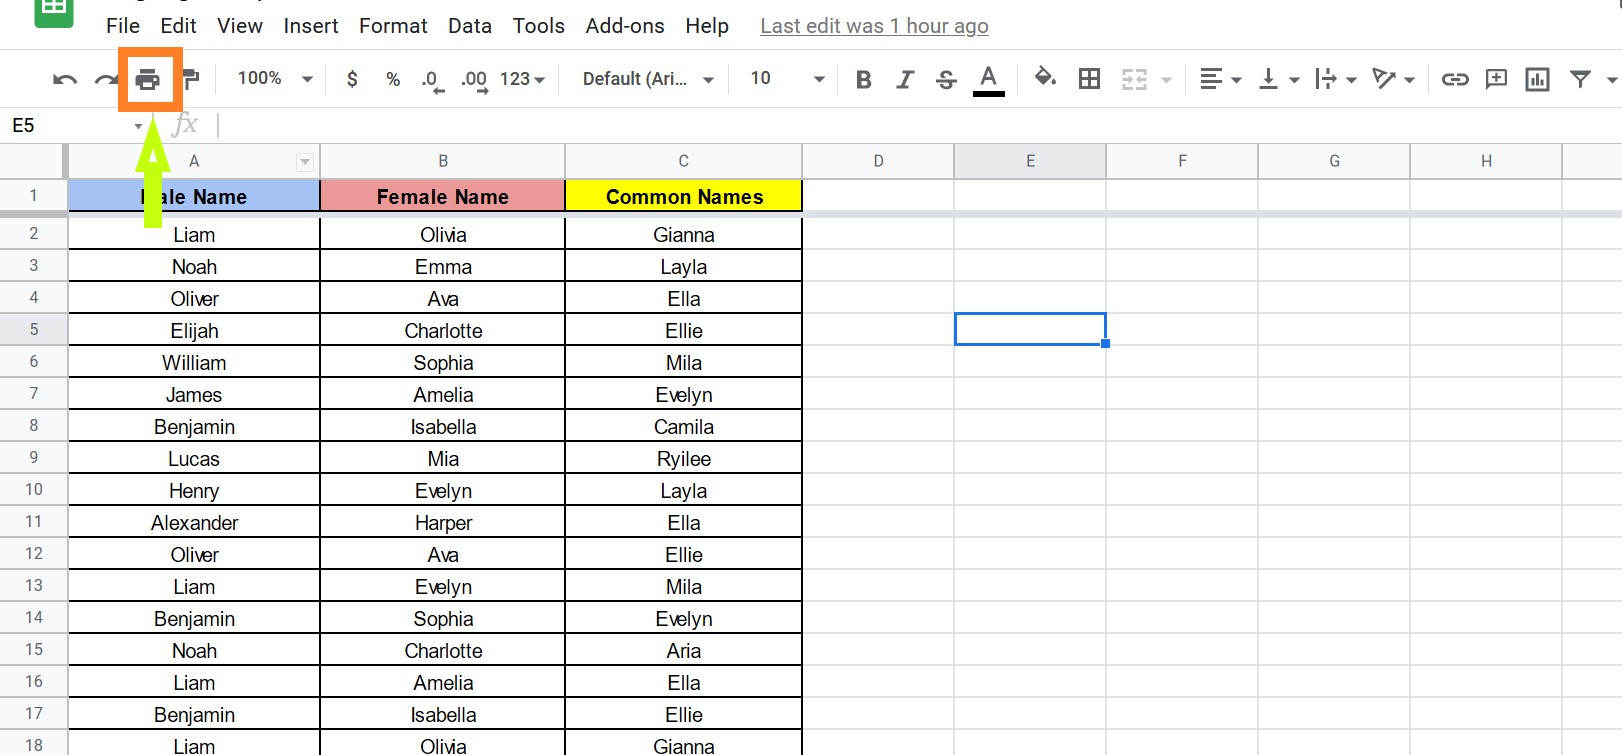 how to set print area in google sheets